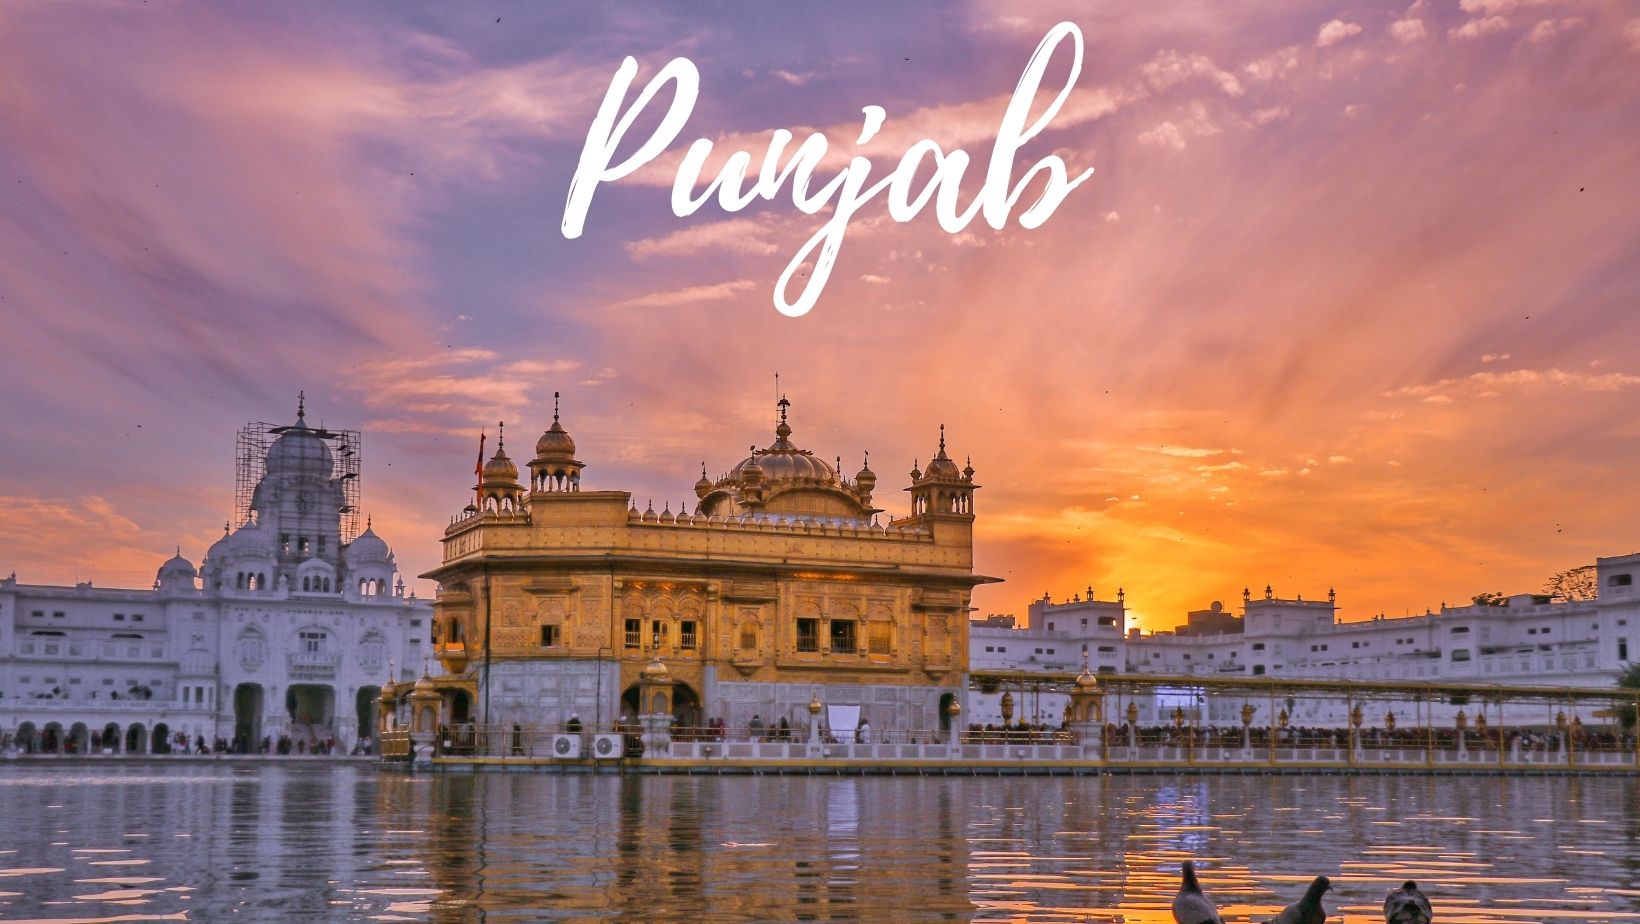 Best Place to Visit in Punjab